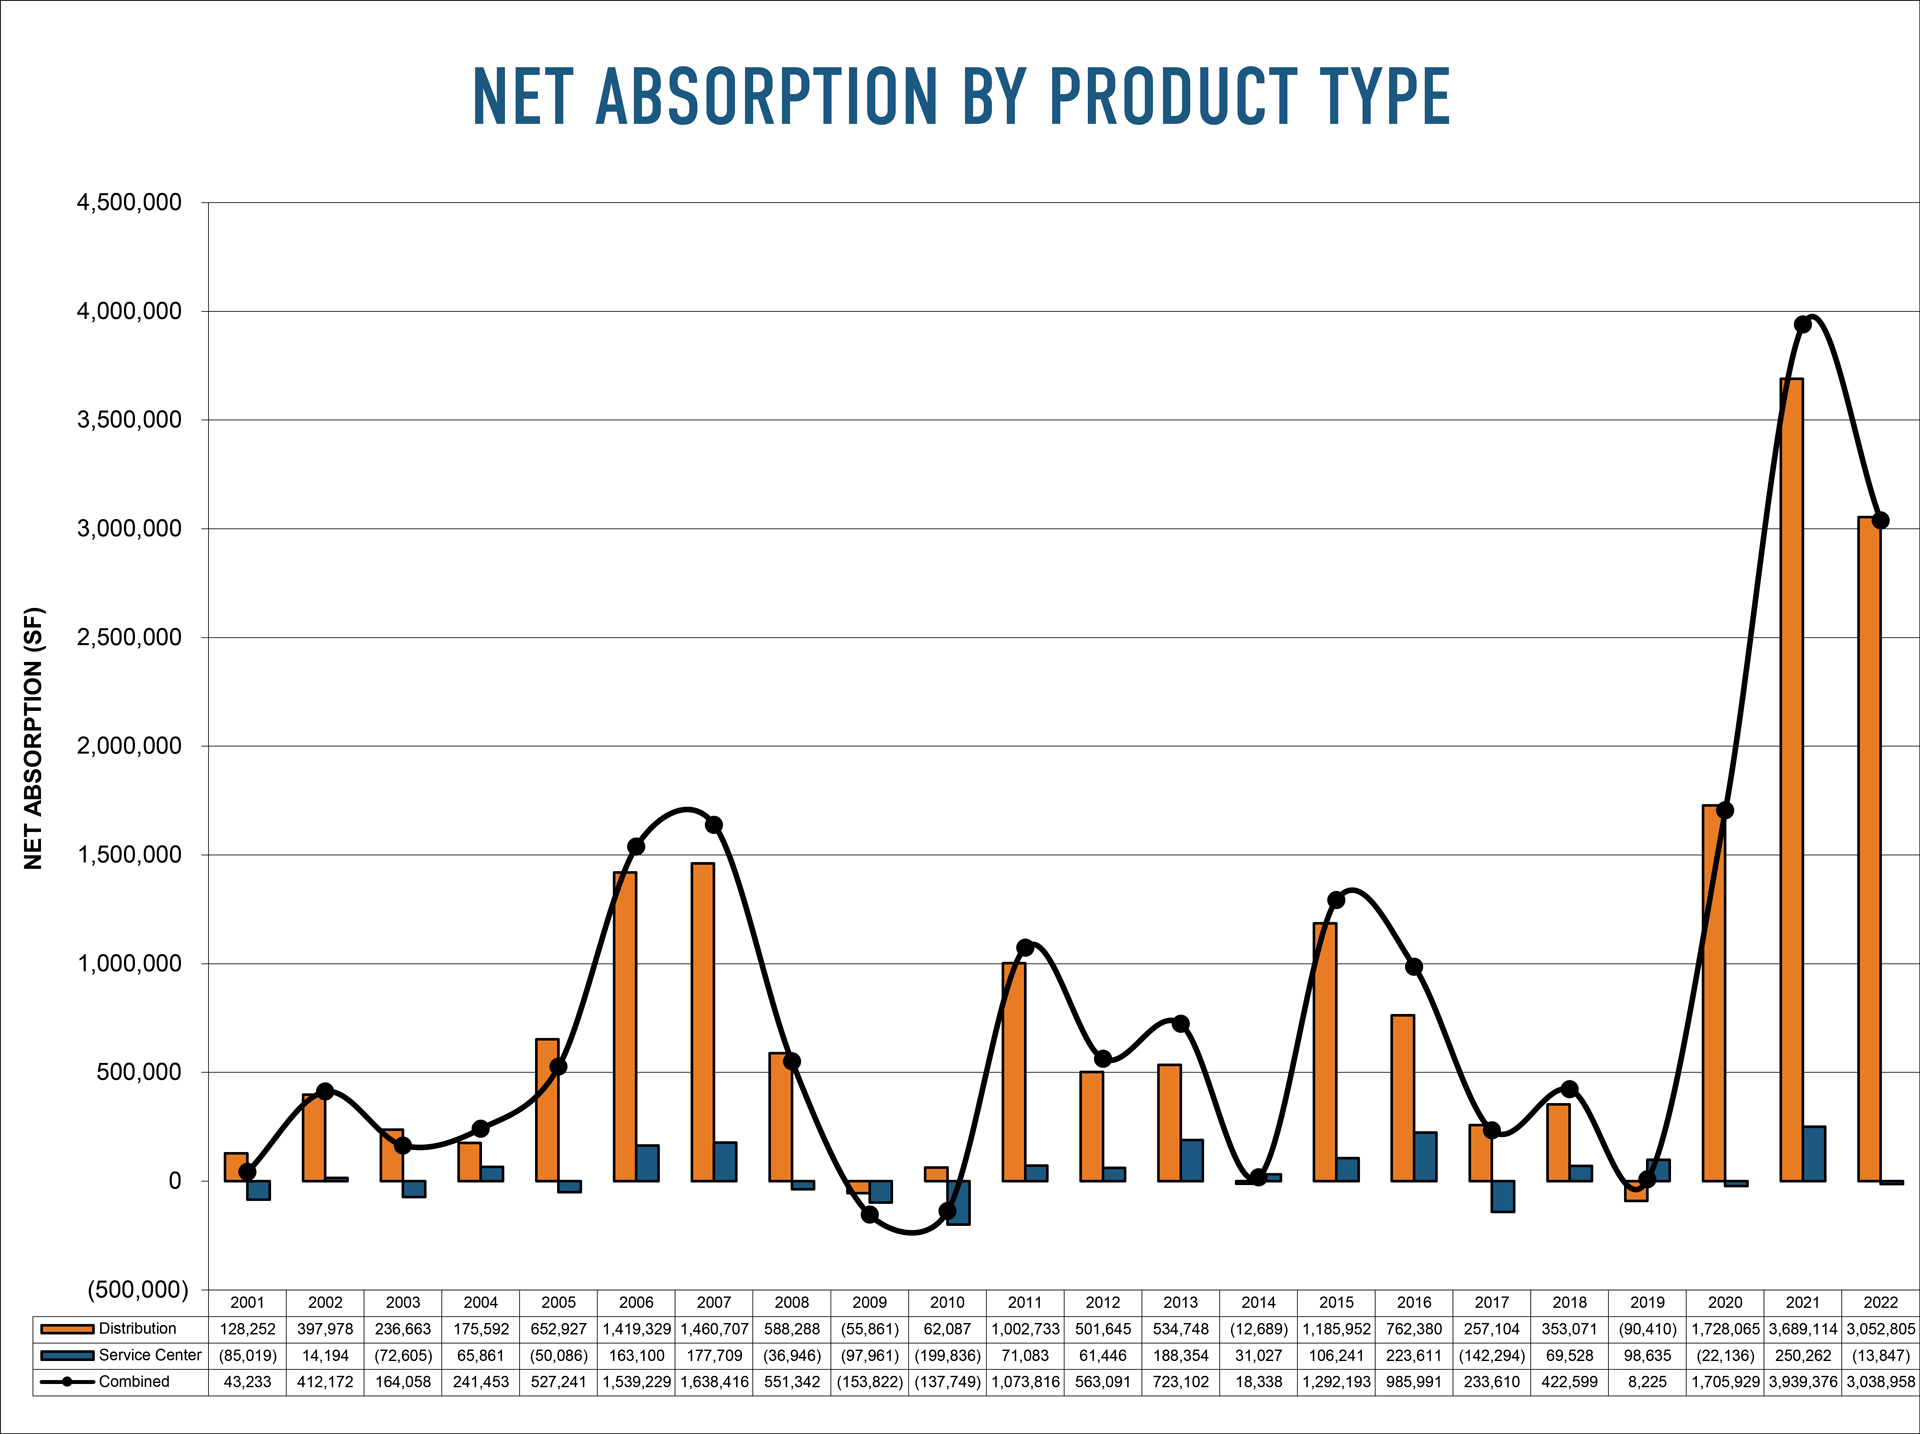 Graph depicting net absorption by product type